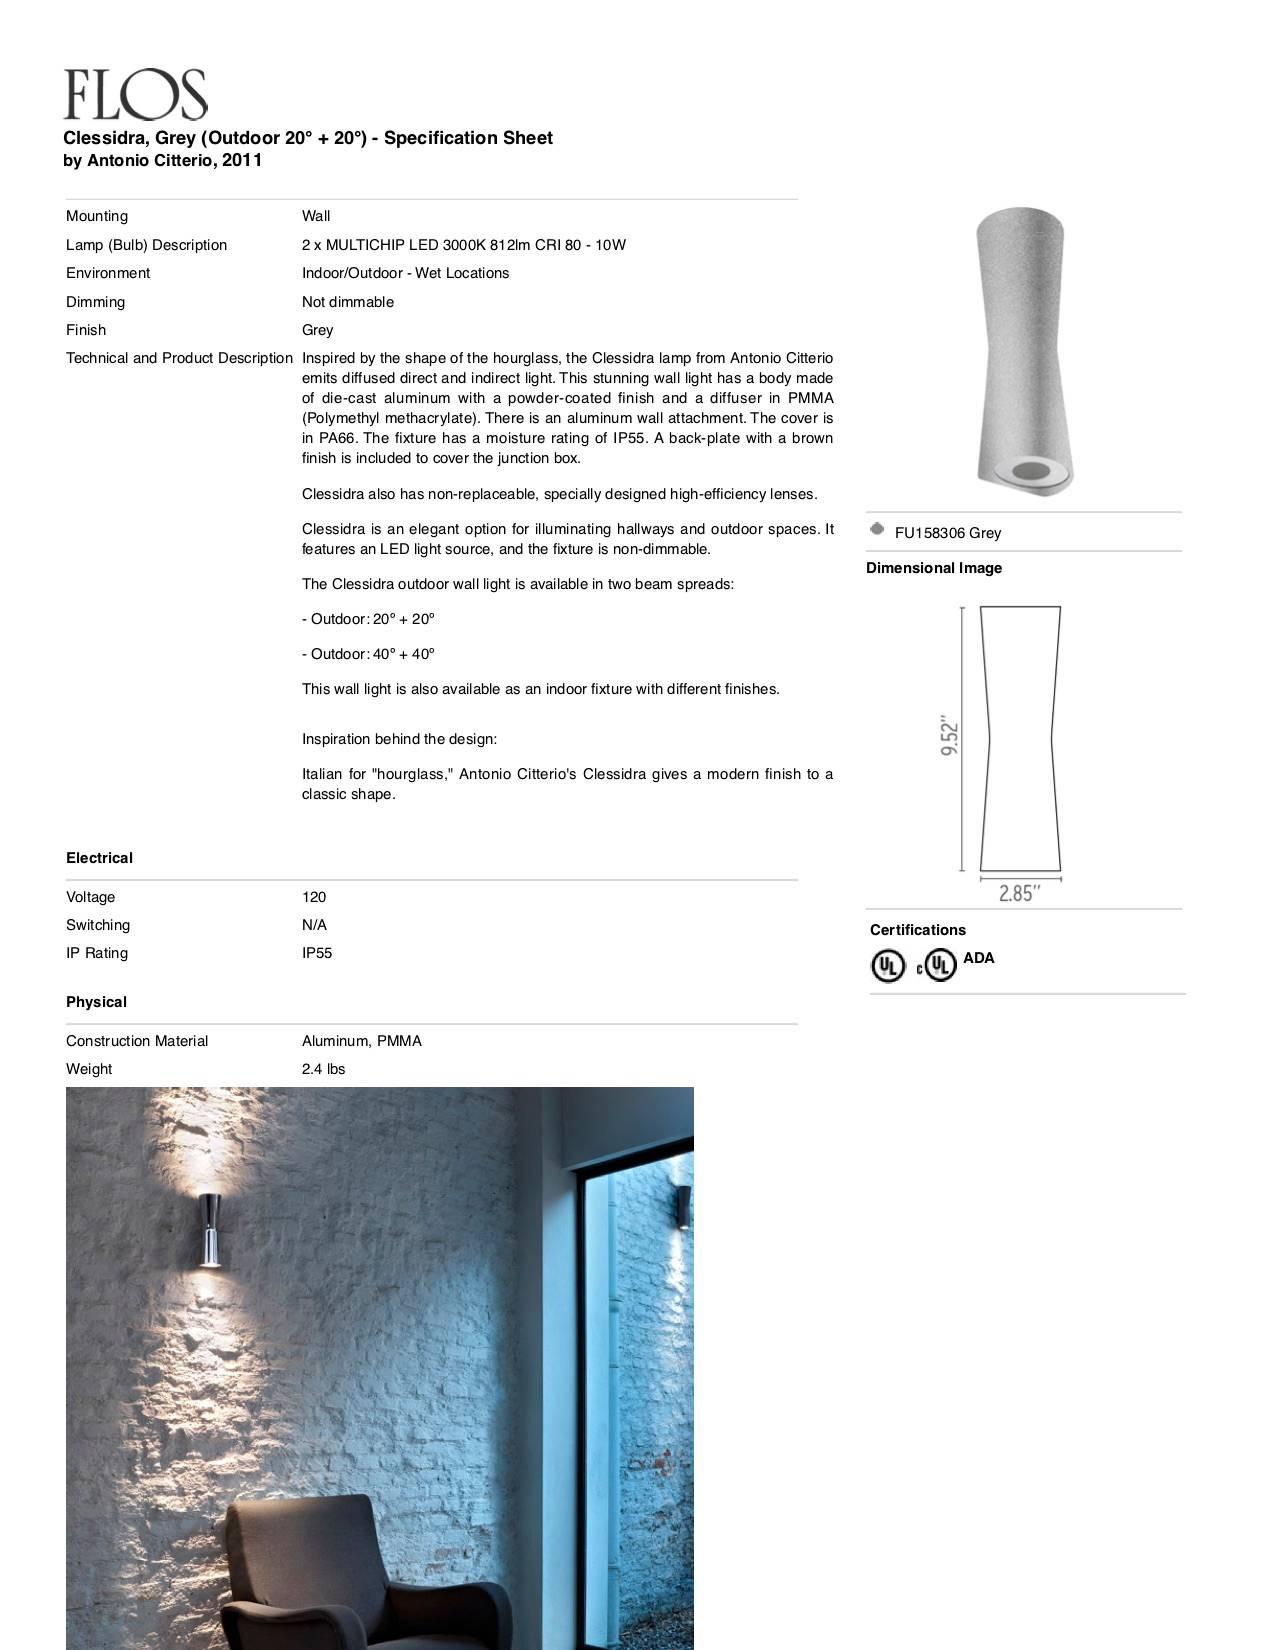 Italian FLOS Clessidra 40° + 40° Outdoor Wall Lamp in Grey by Antonio Citterio For Sale